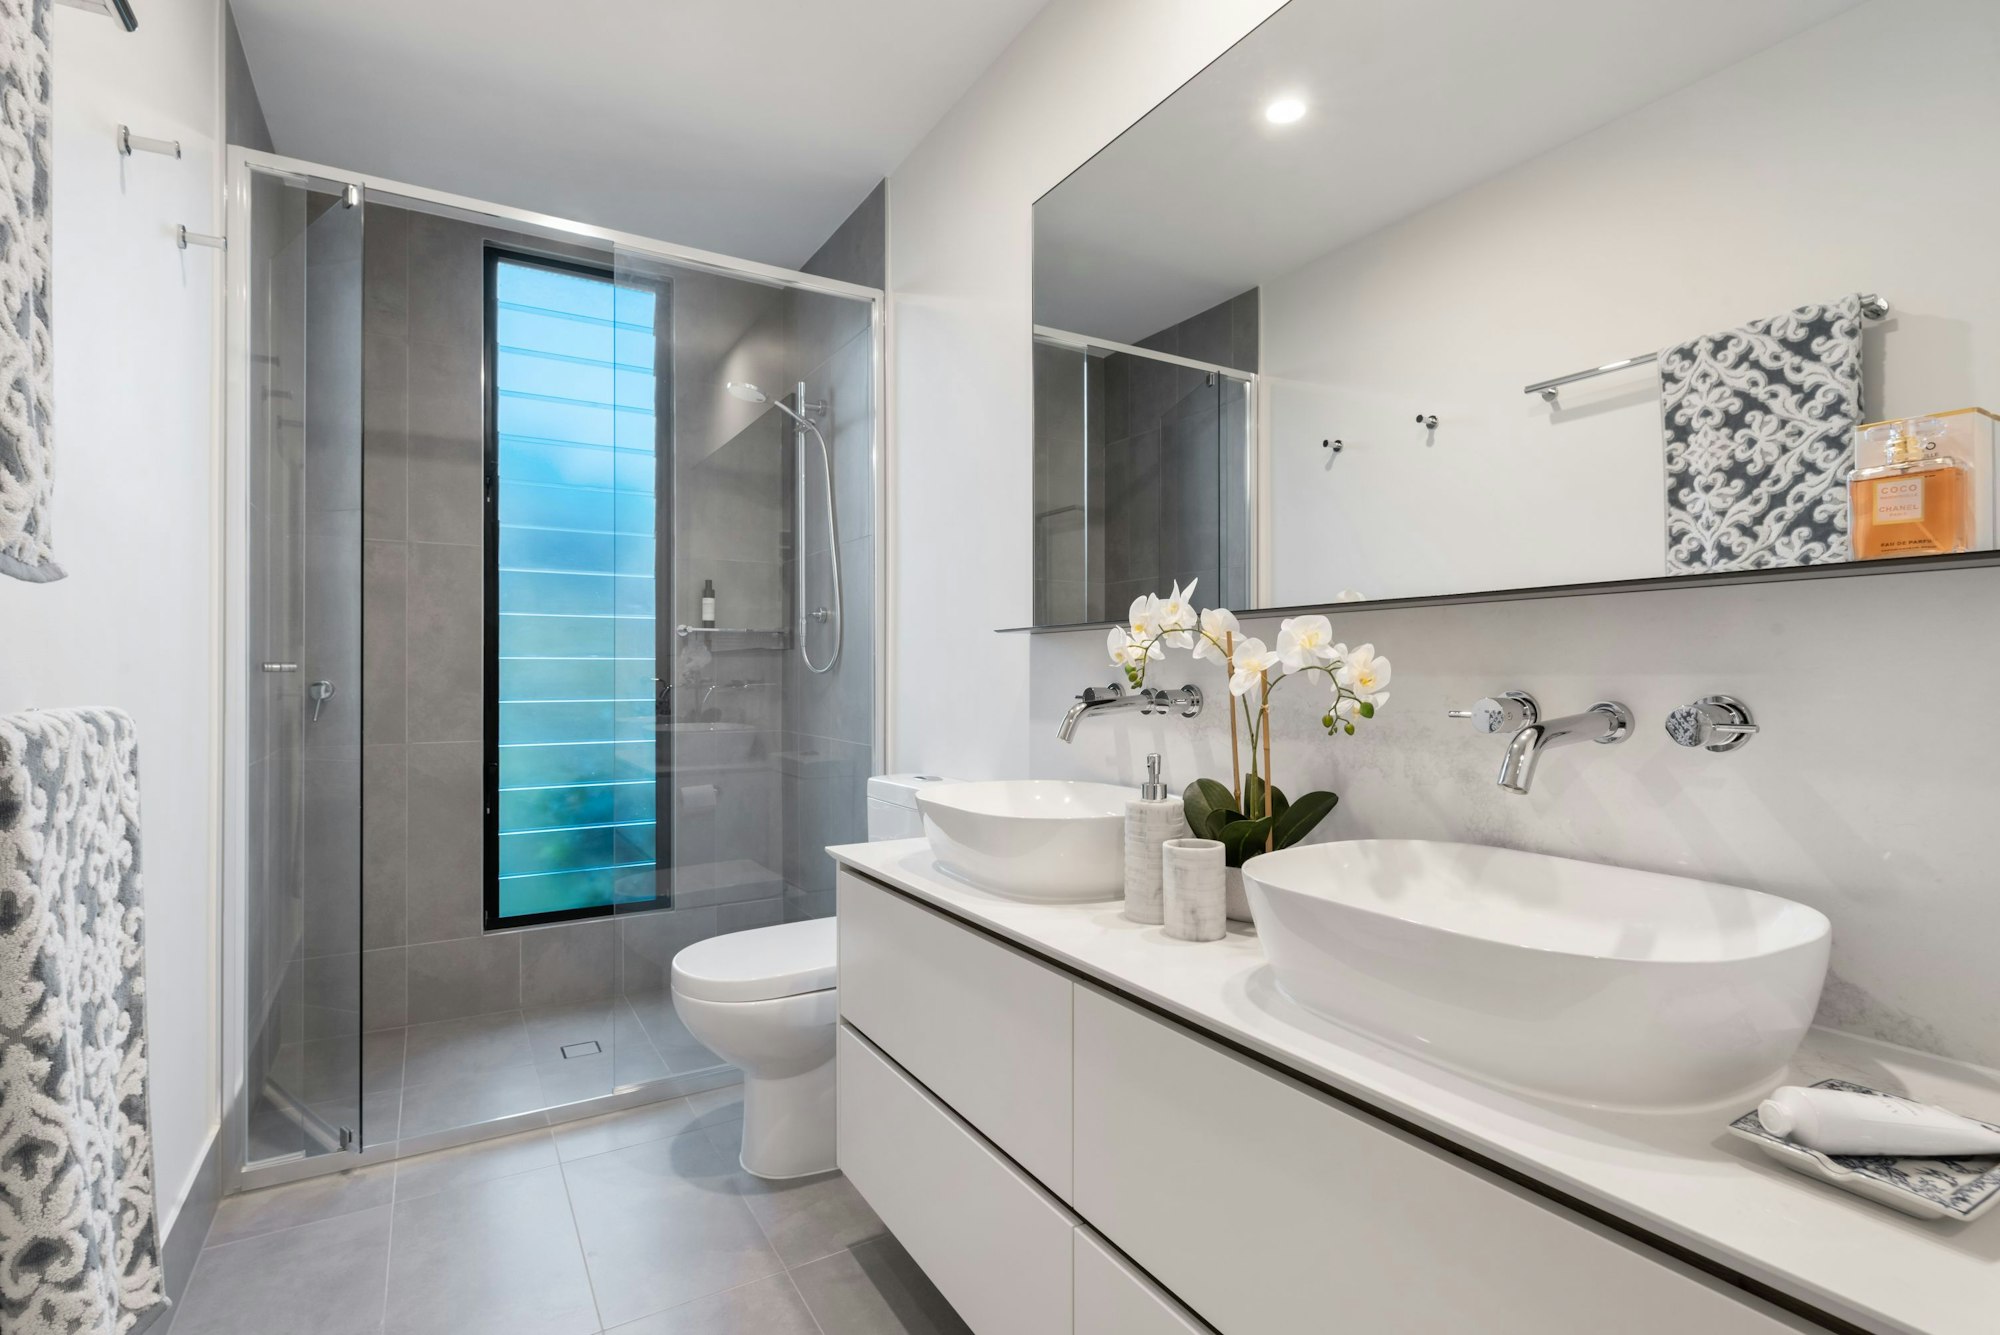 Large ensuite bathroom with his and hers basins, and larrge walk in shower. 